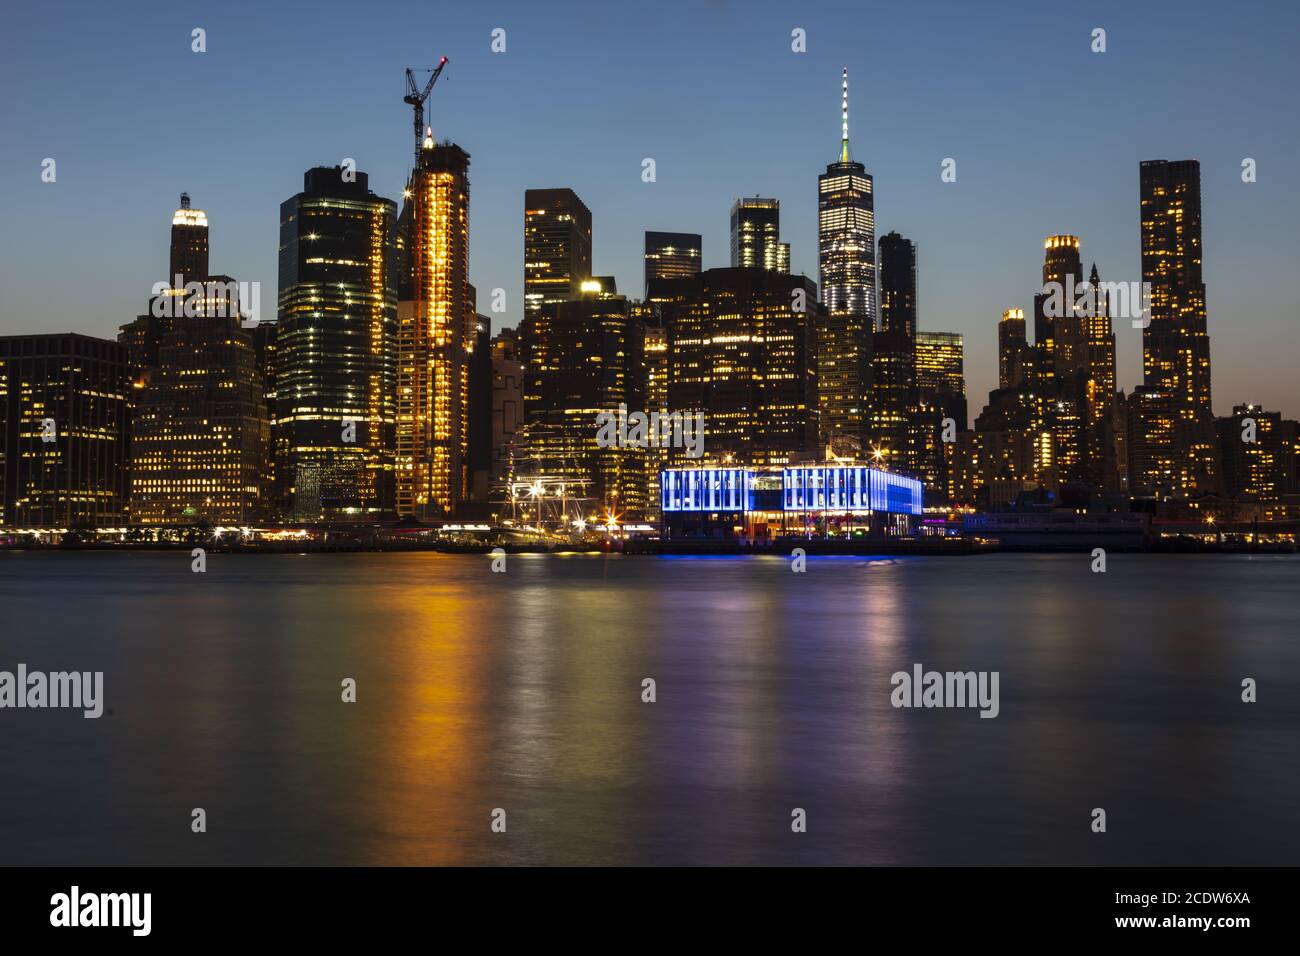 Scenes From A Thriving Metropolis On A Summers Night Stock Photo